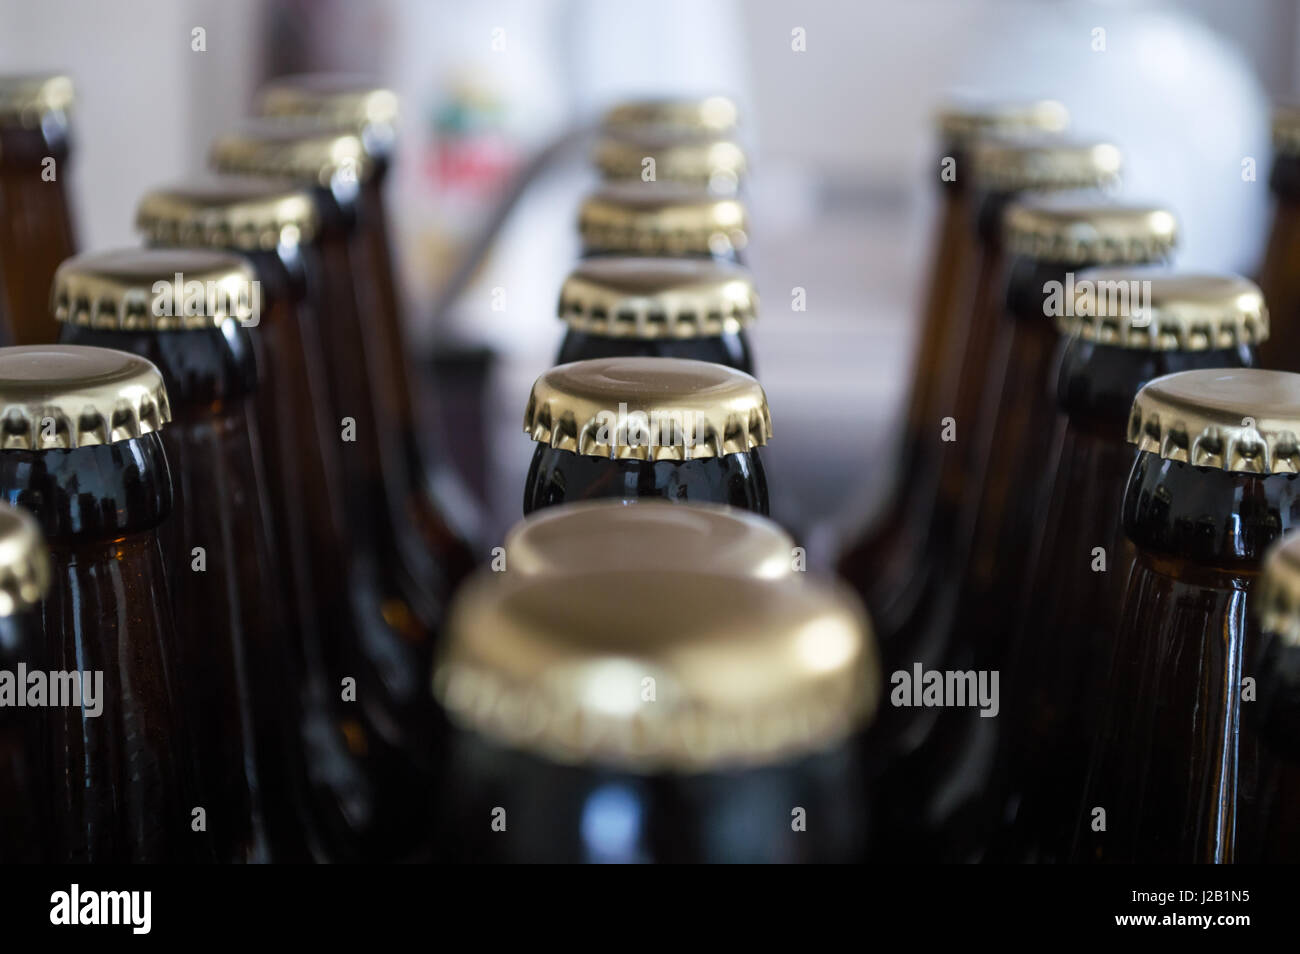 Beer Bottles in a Row Background Stock Photo